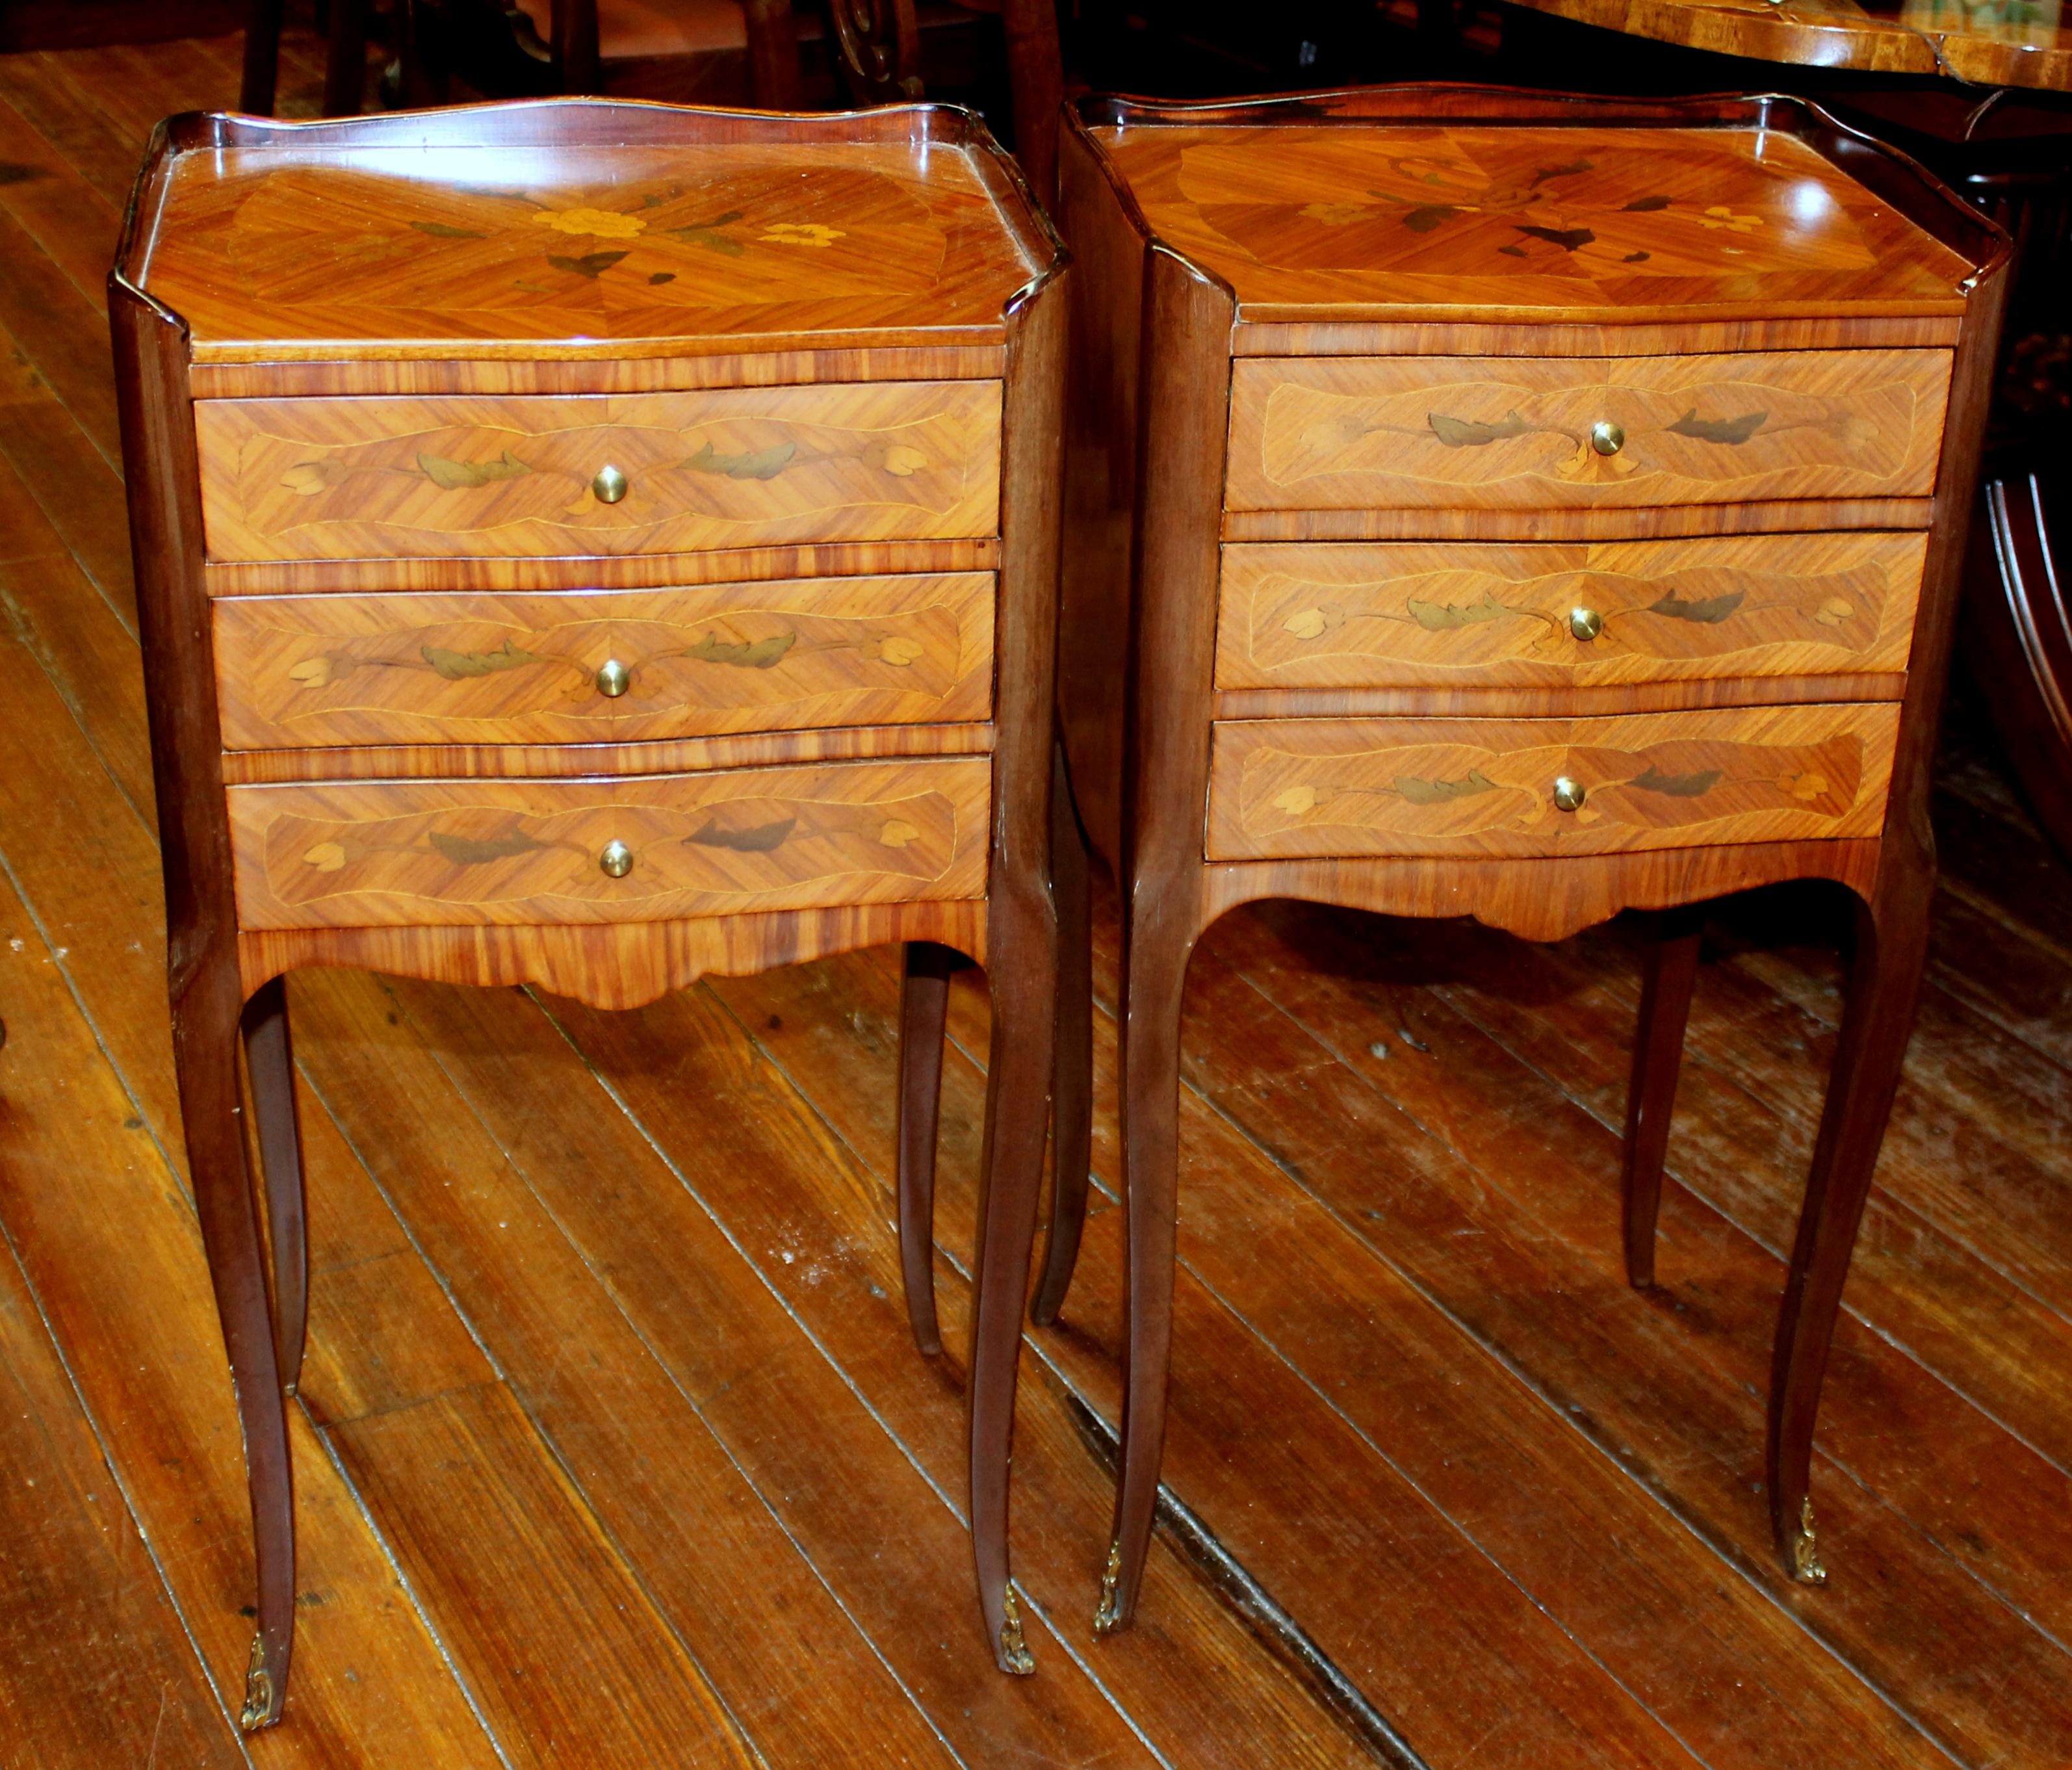 Fine pair of old French Louis XV style marquetry inlaid kingwood bedside tables; three drawers each table and top gallery. Some very slight dings noted and illustrated.